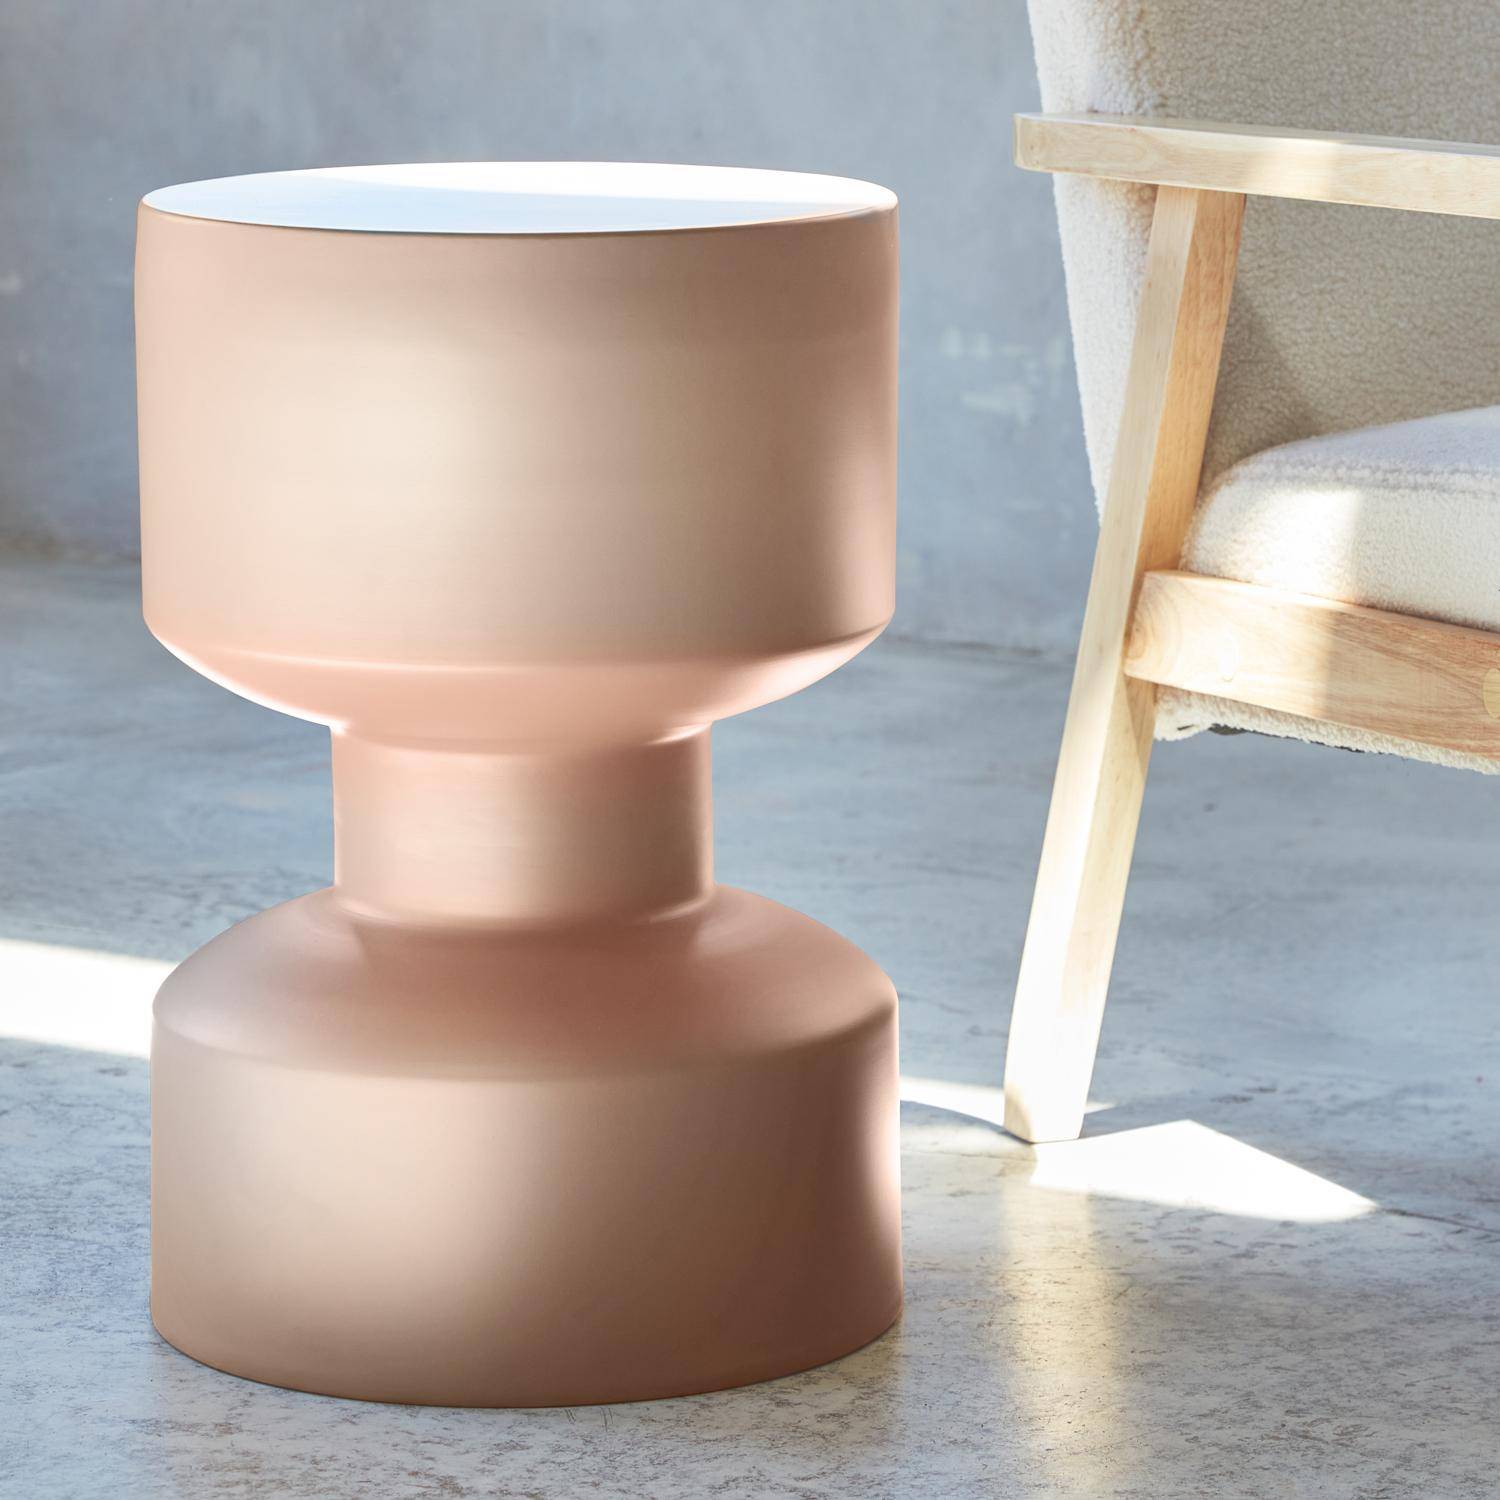 End table, sofa side table, metal bedside table, Ø30 x H 47cm, pink Photo1